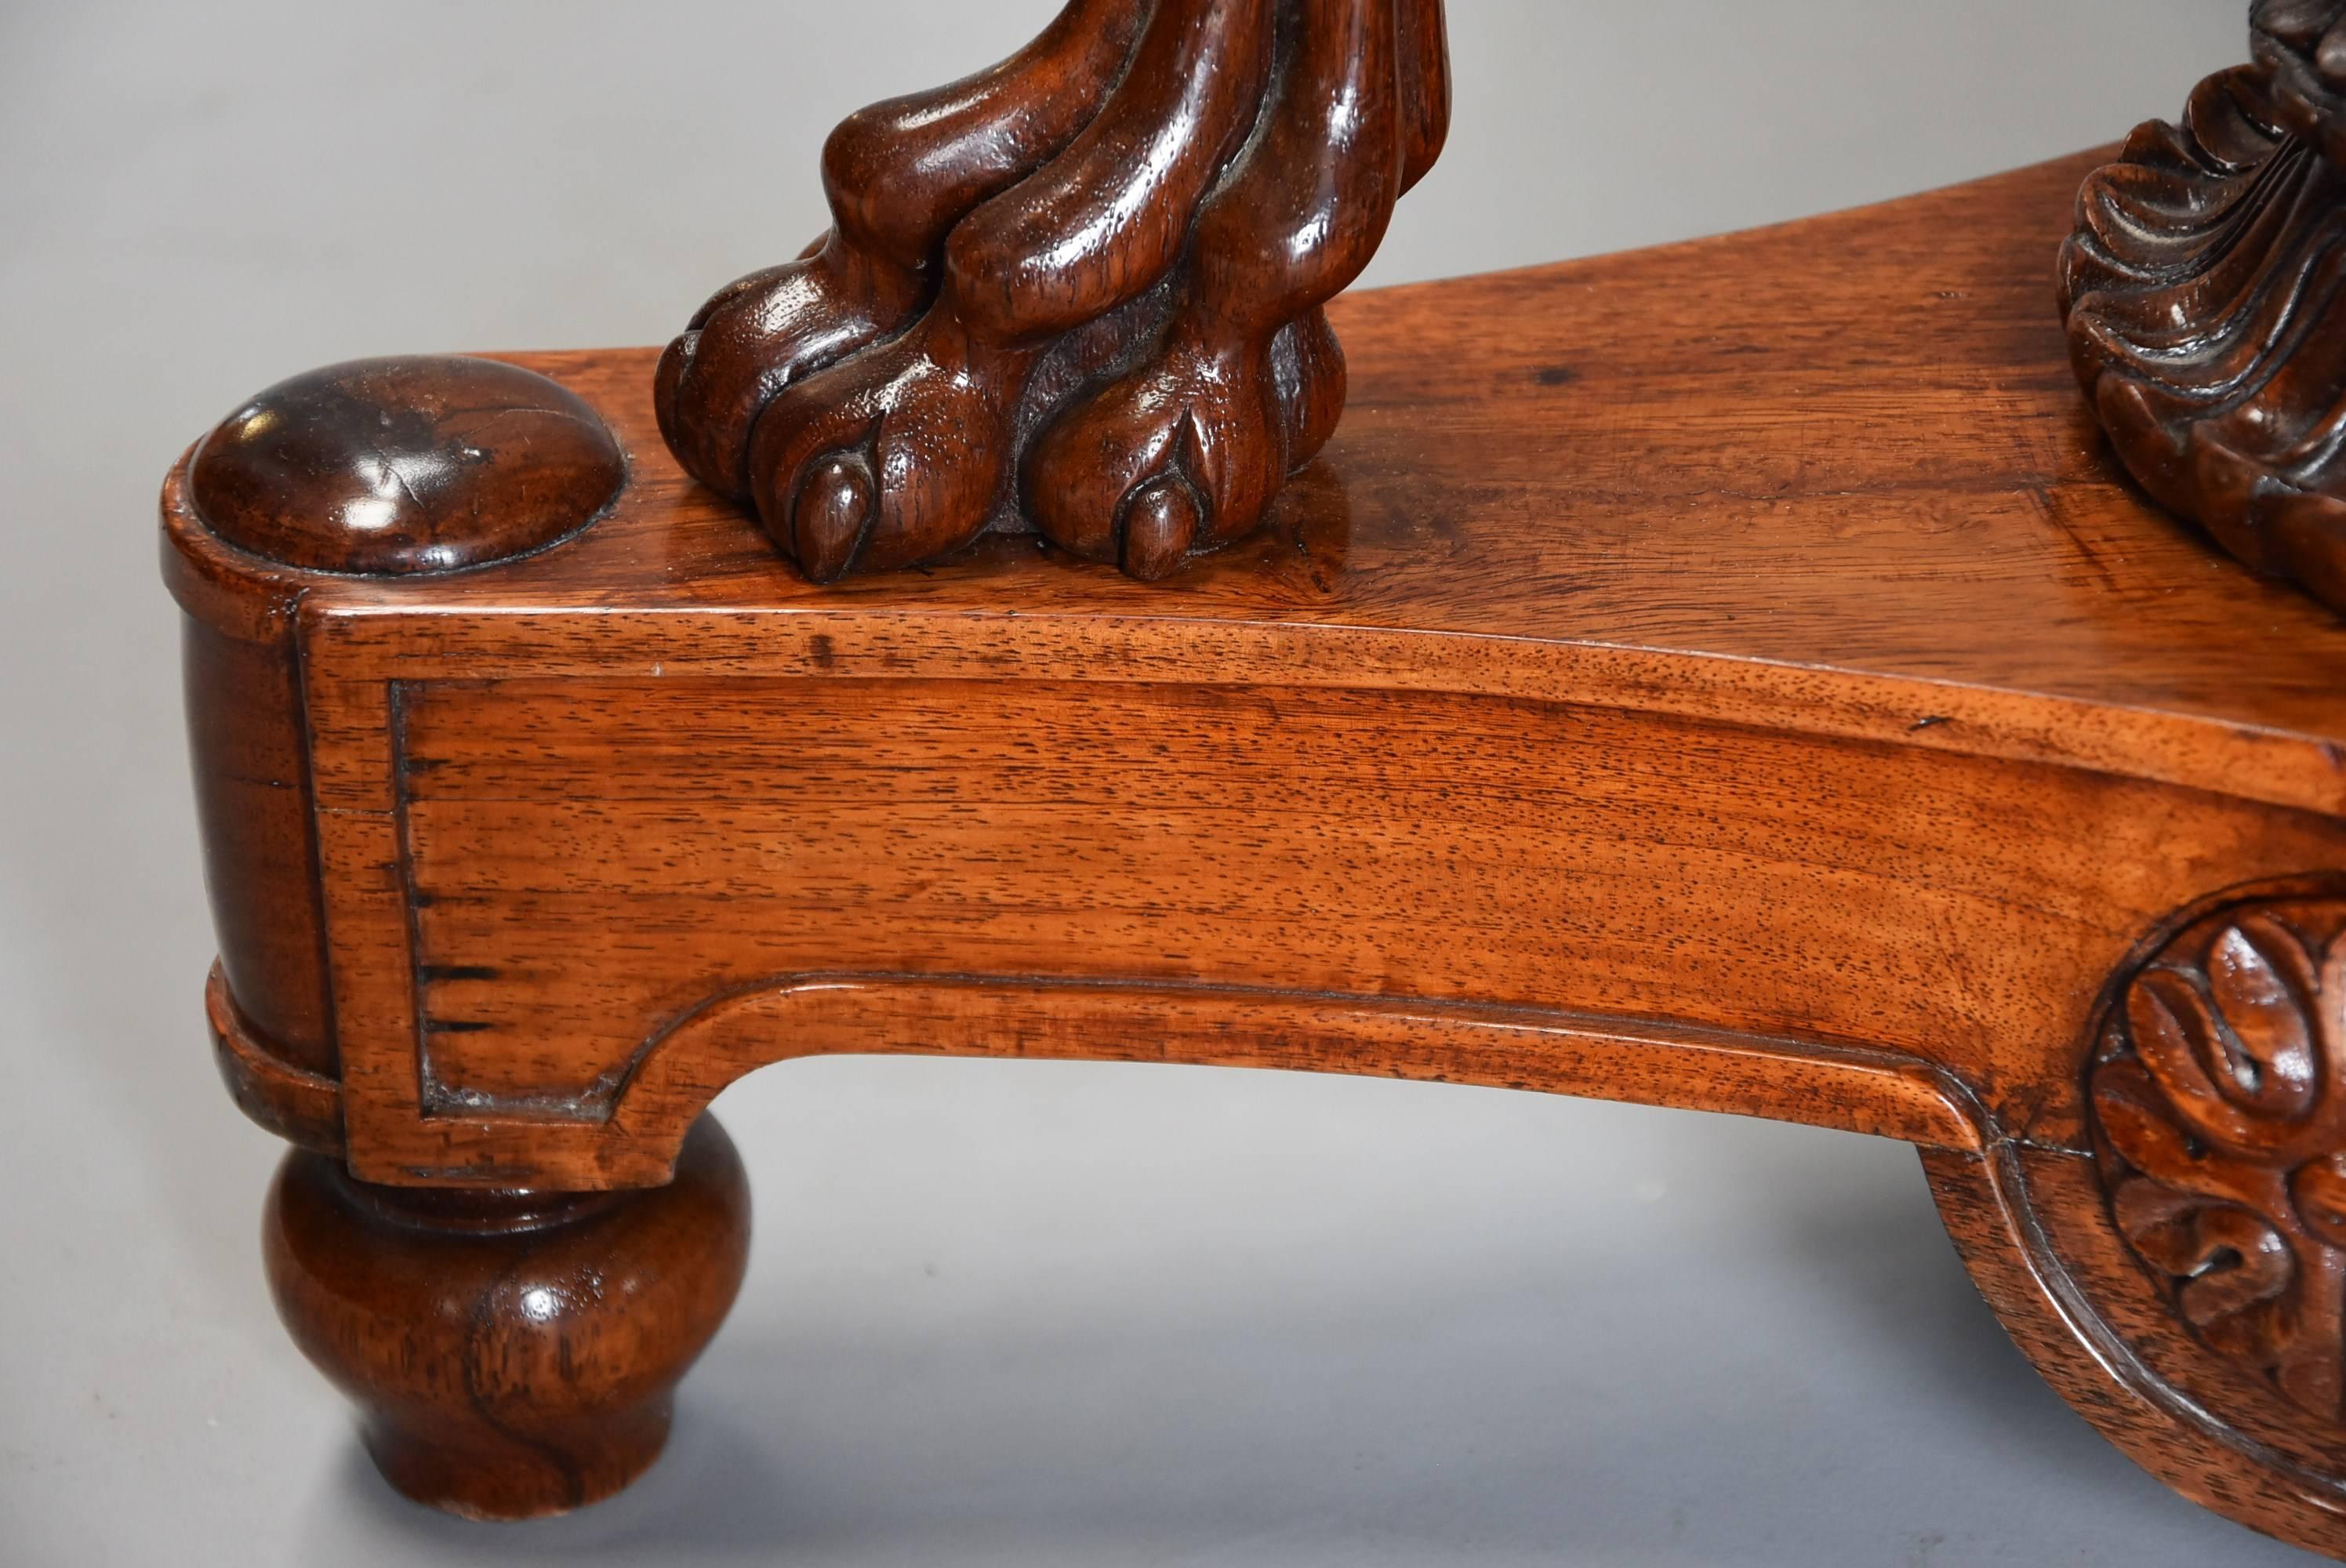 19th Century Highly Decorative Indian hardwood Carved Jardiniere/Wine Cooler For Sale 6